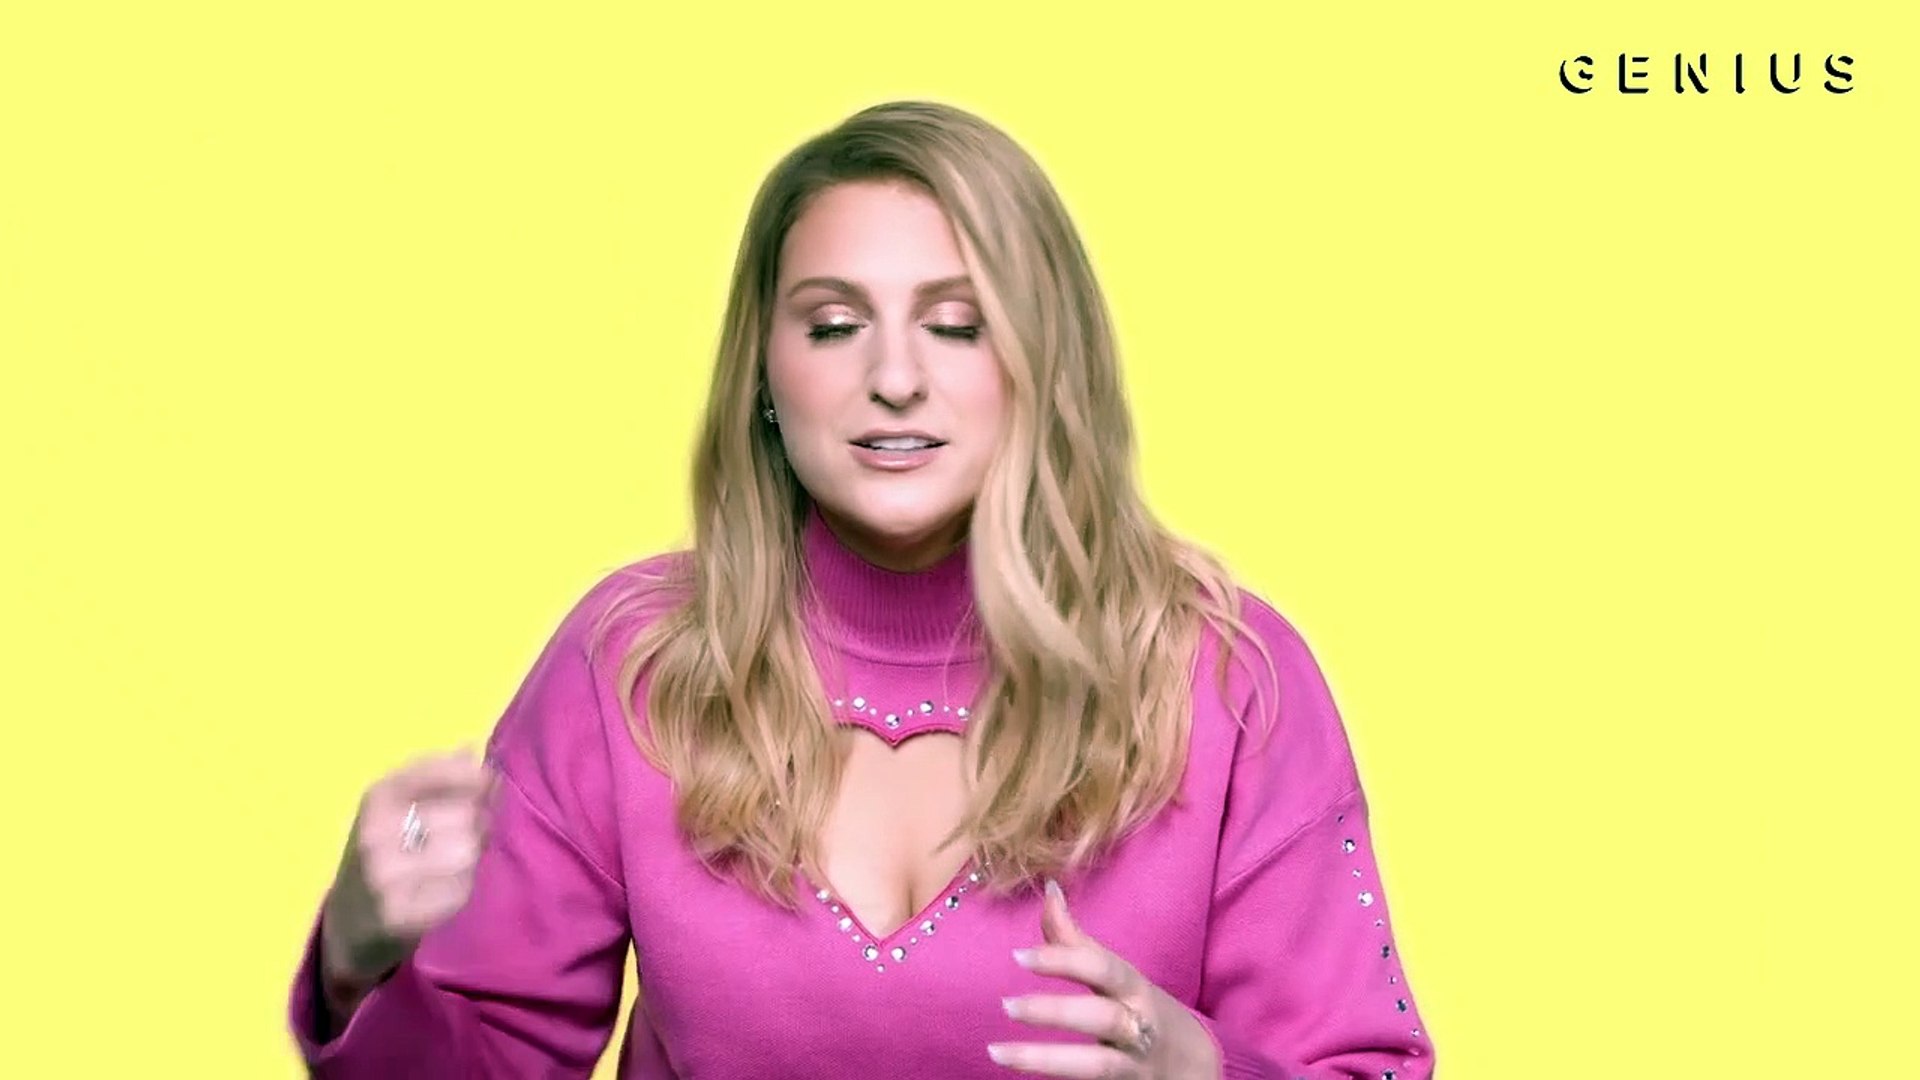 Meghan Trainor Made You Look Official Lyrics & Meaning Verified